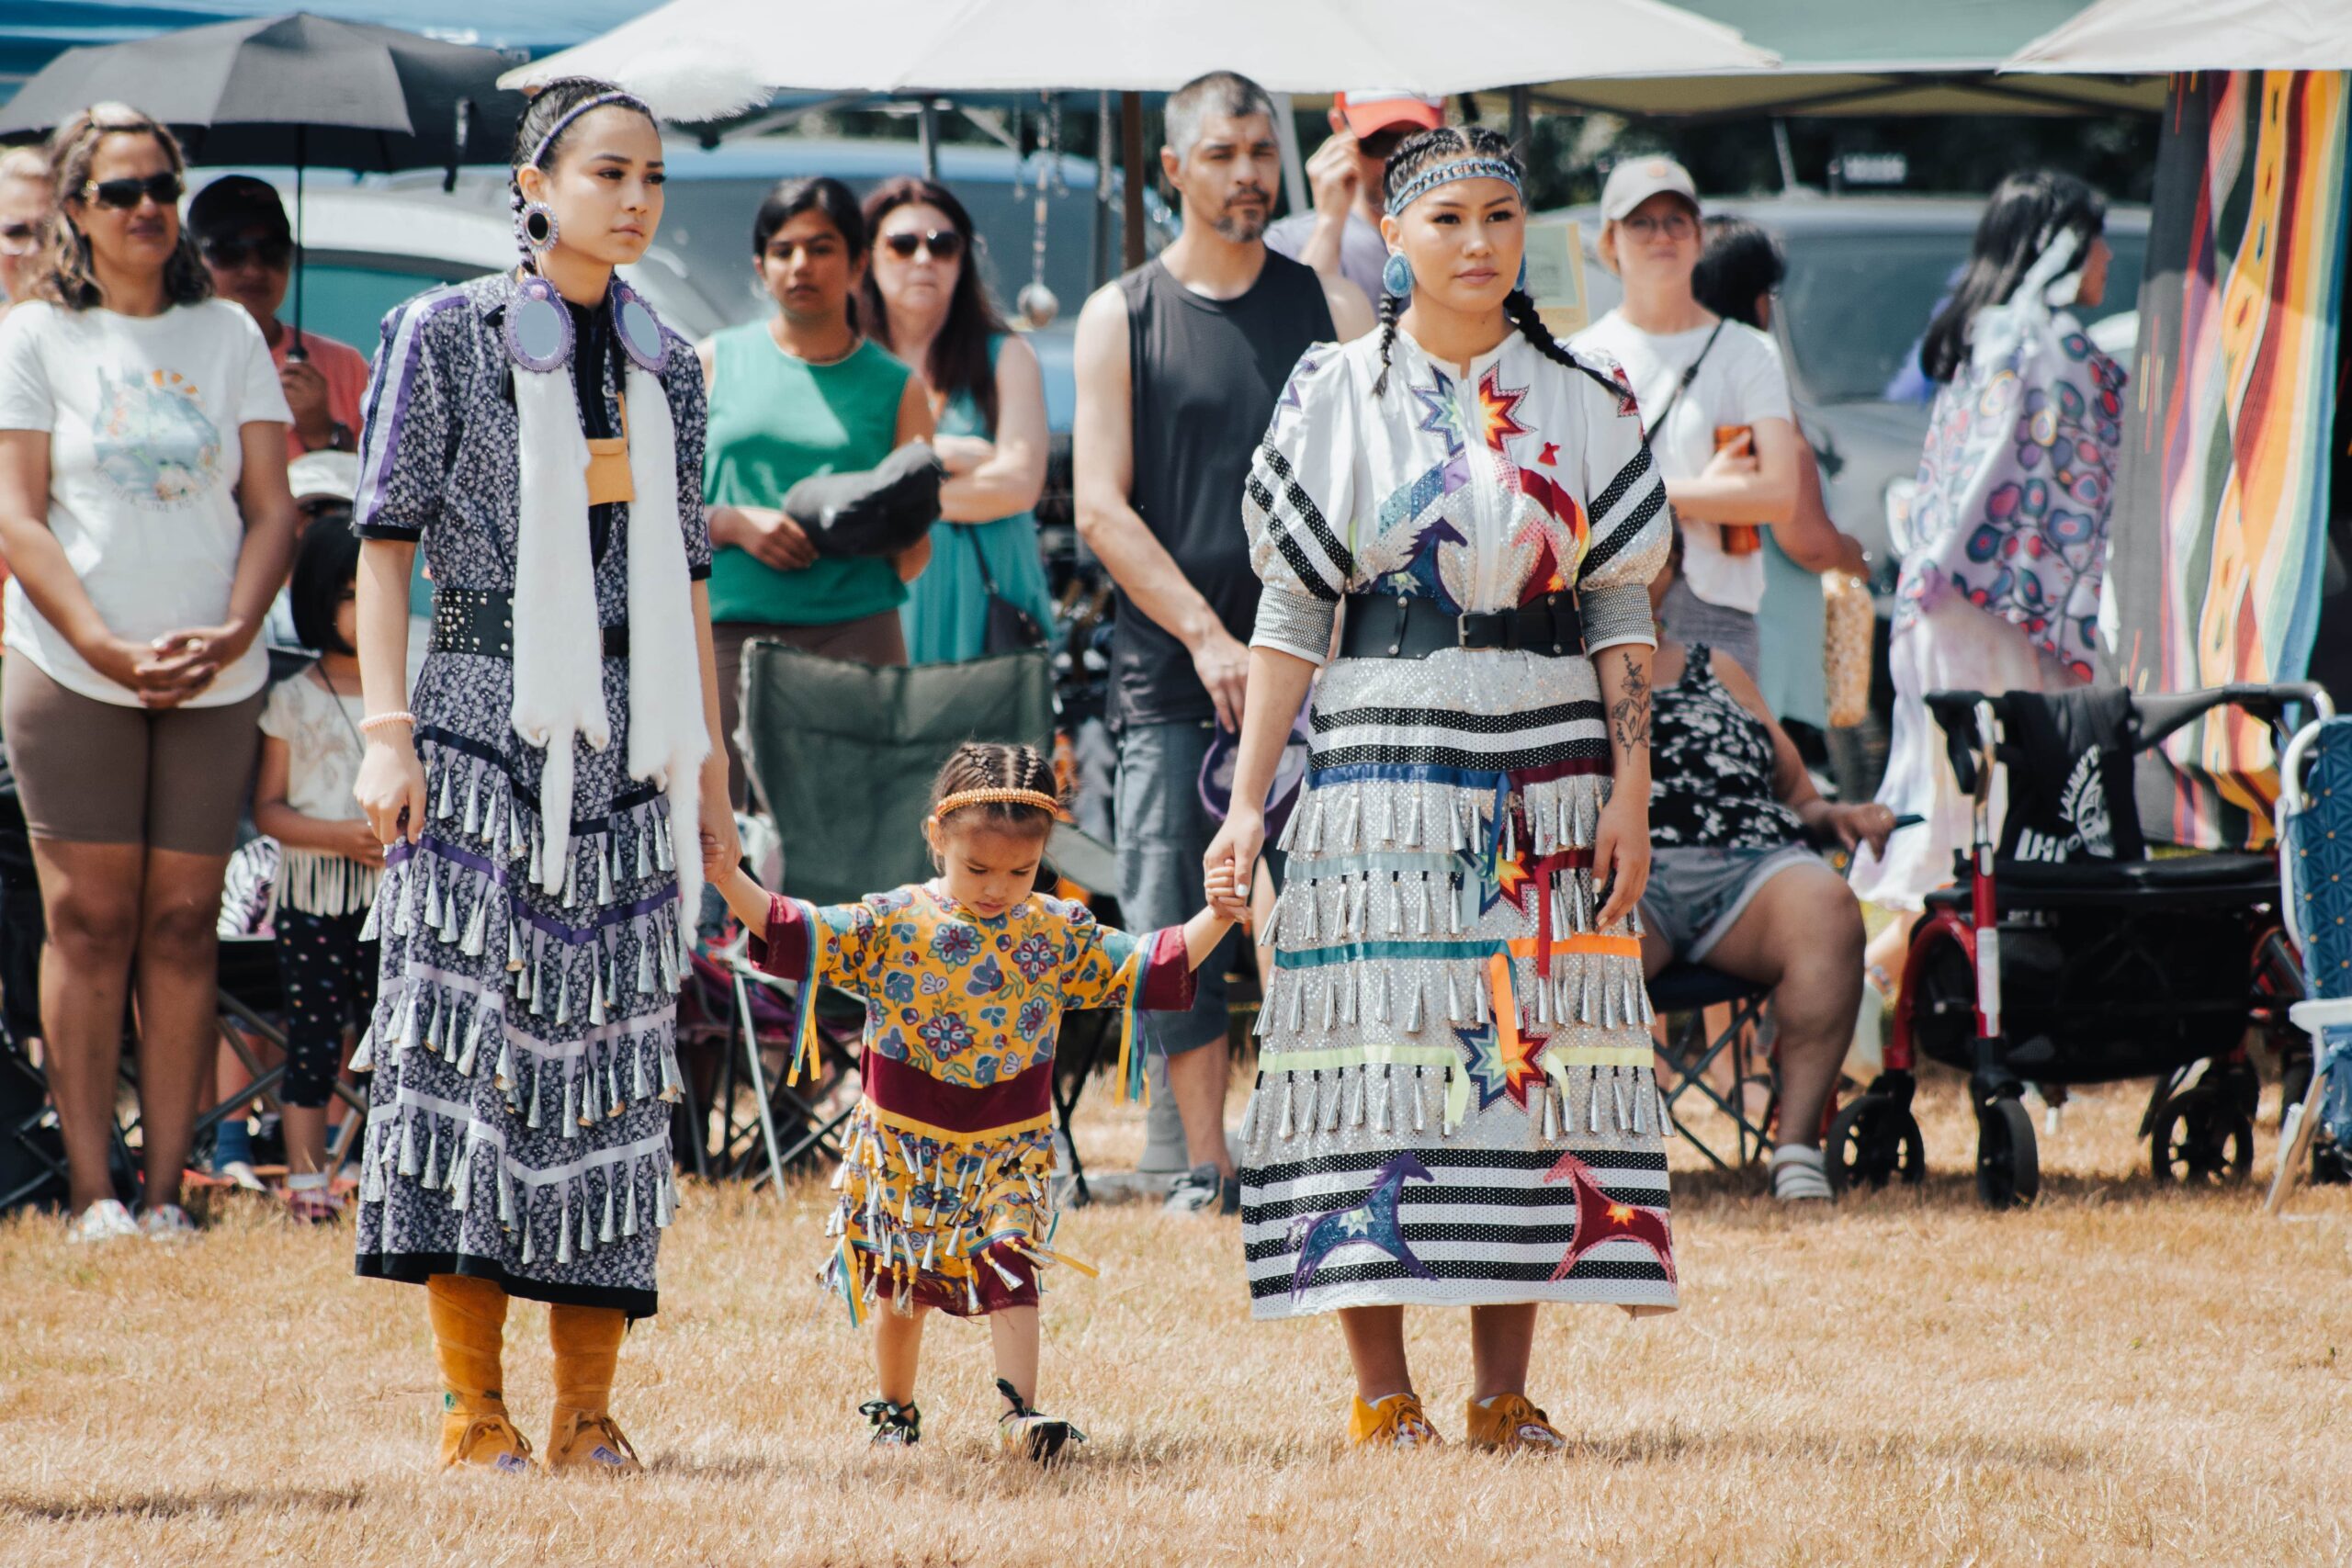 Two women stand holding the hands of a young child in-between them, all wearing traditional Indigenous regalia.